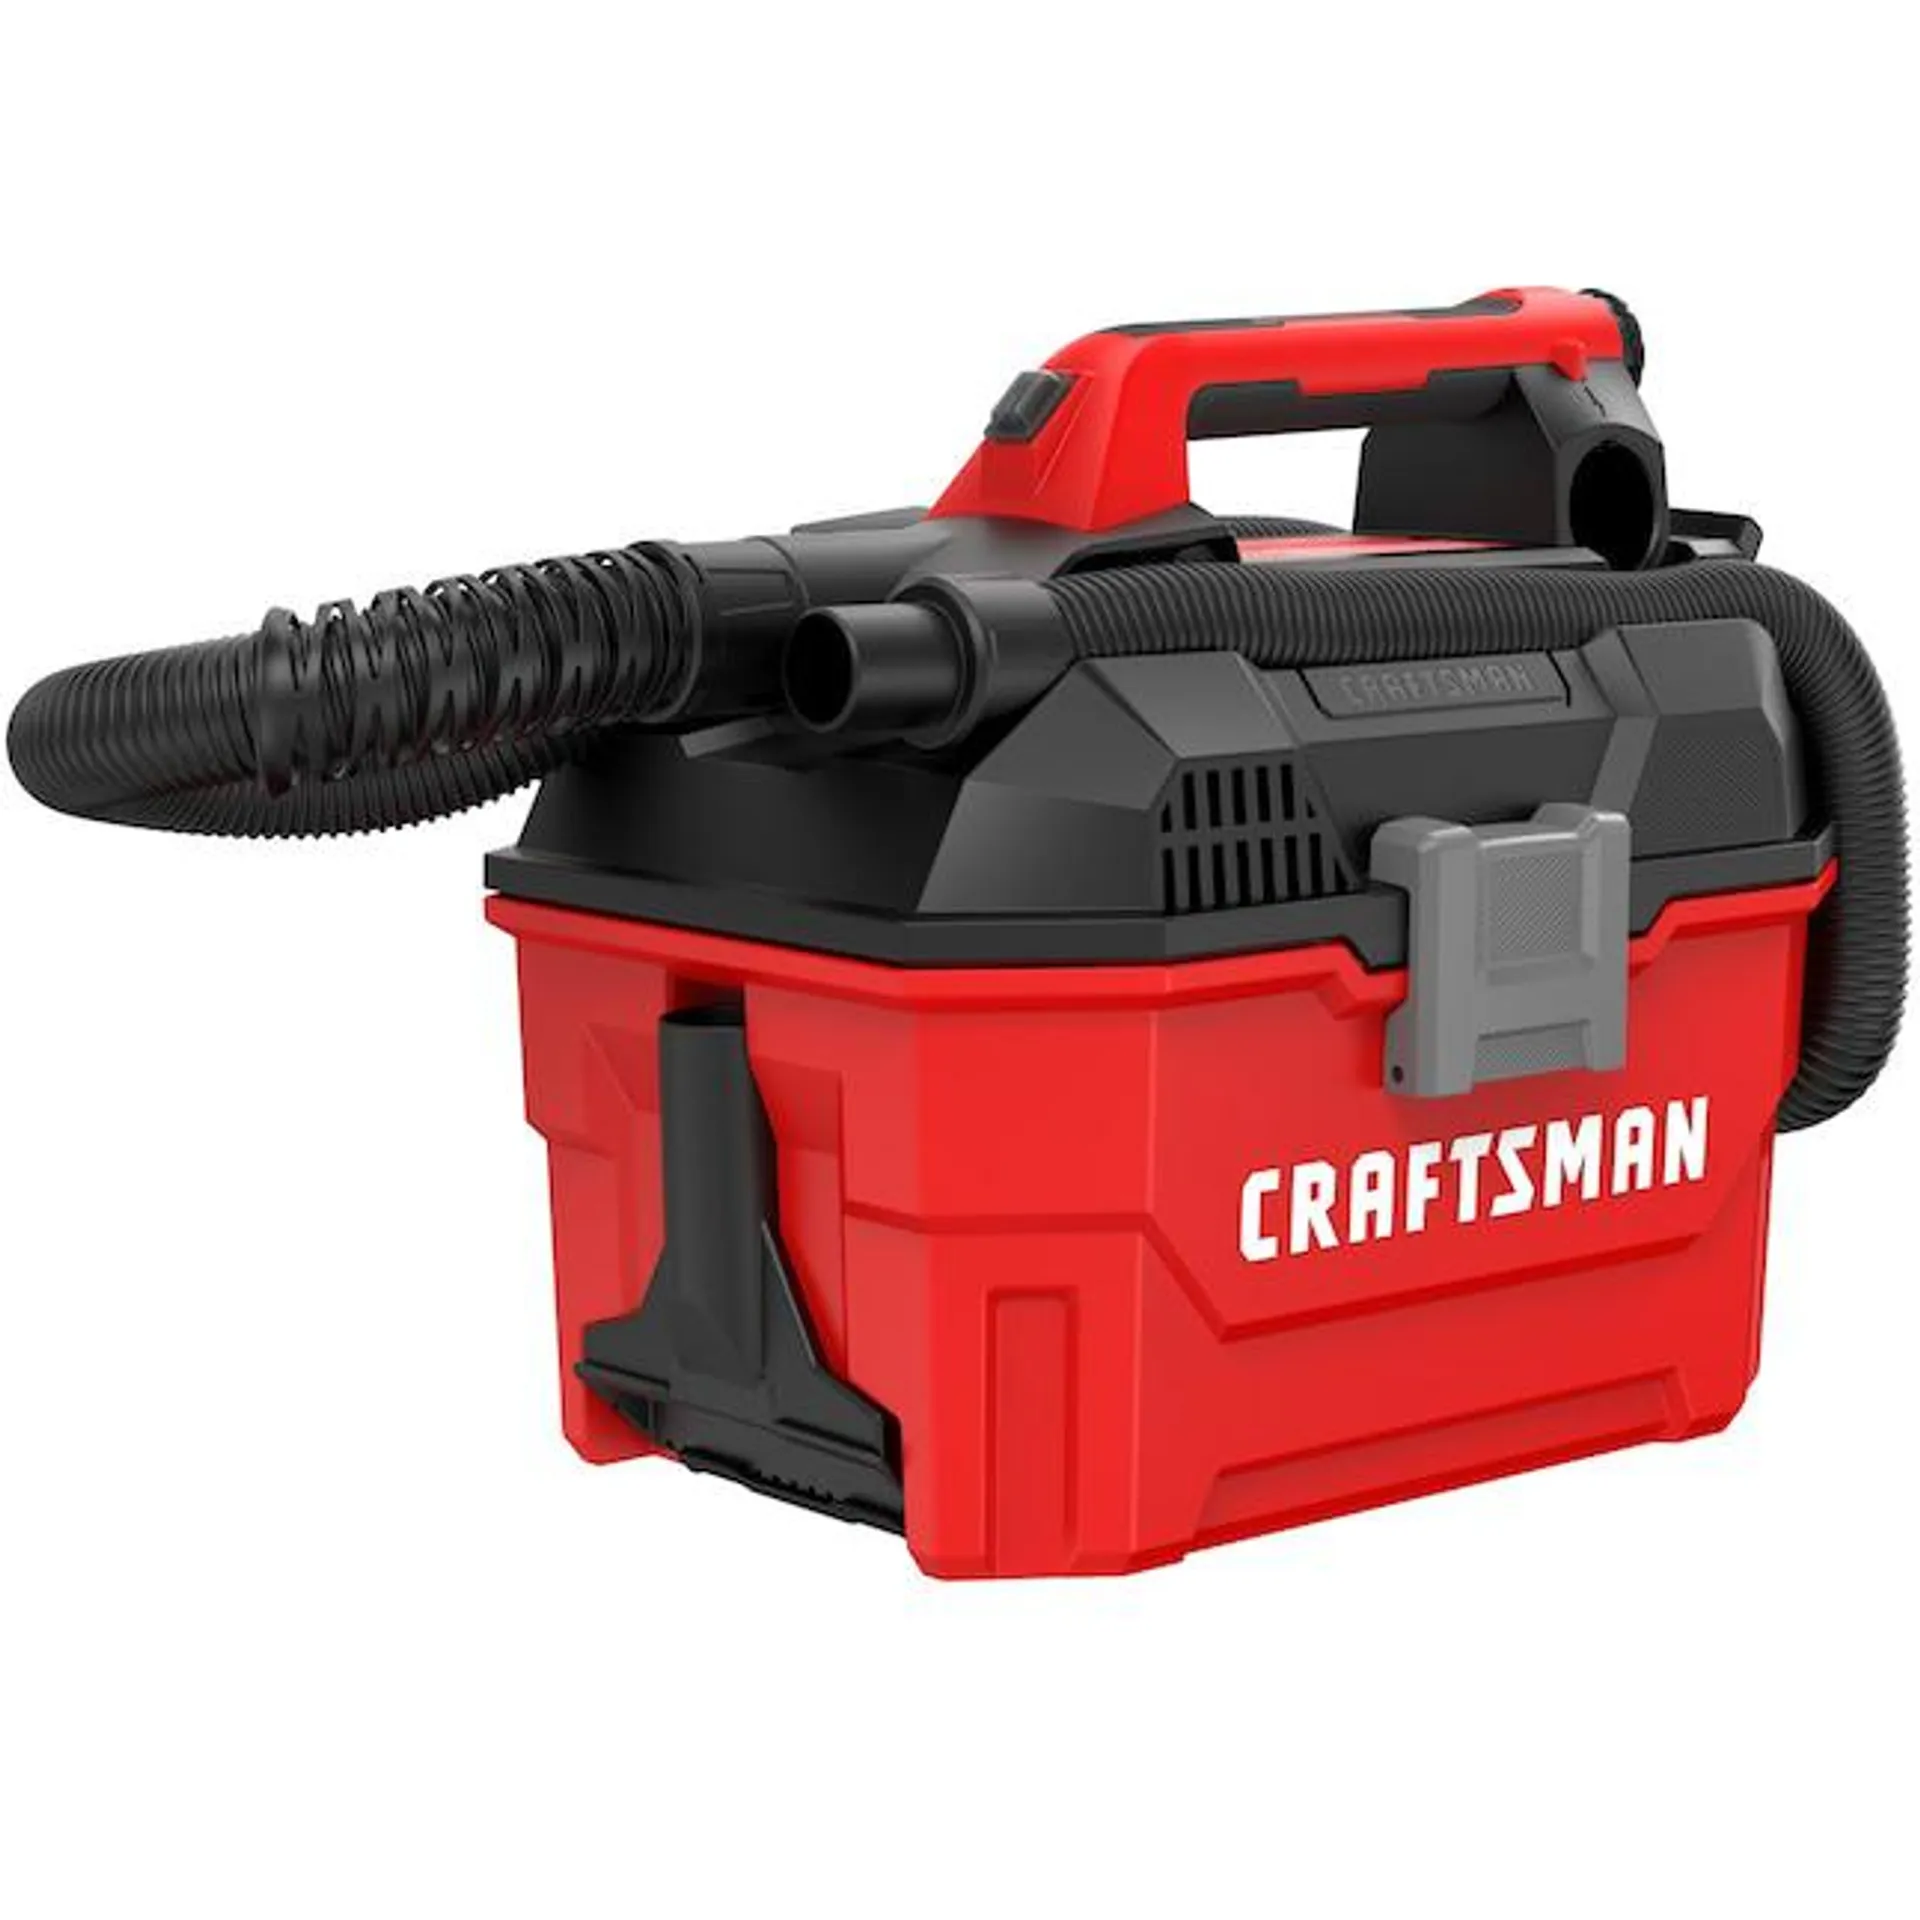 CRAFTSMAN V20 20-volt Max 2-Gallons 35-HP Cordless Wet/Dry Shop Vacuum with Accessories Included (Tool Only)